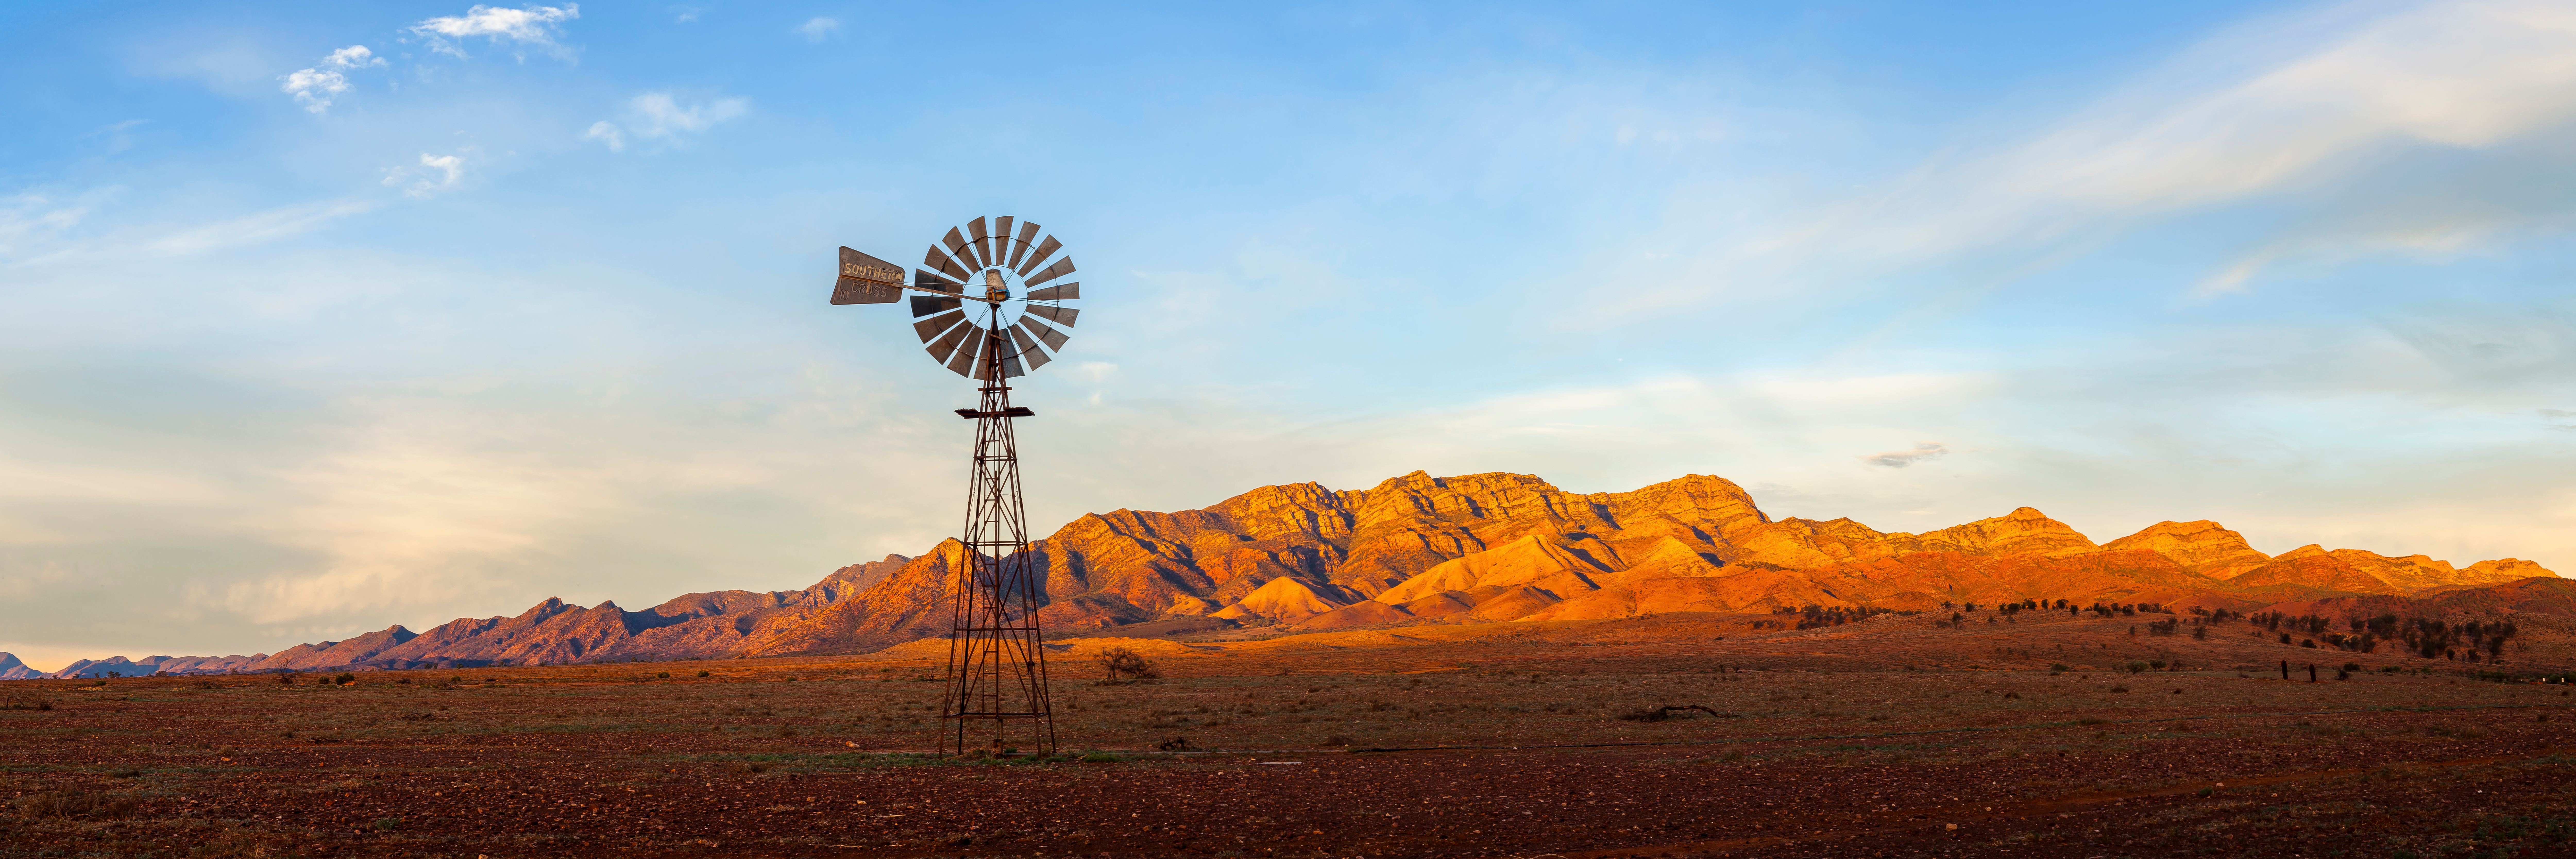 Windmill in outback